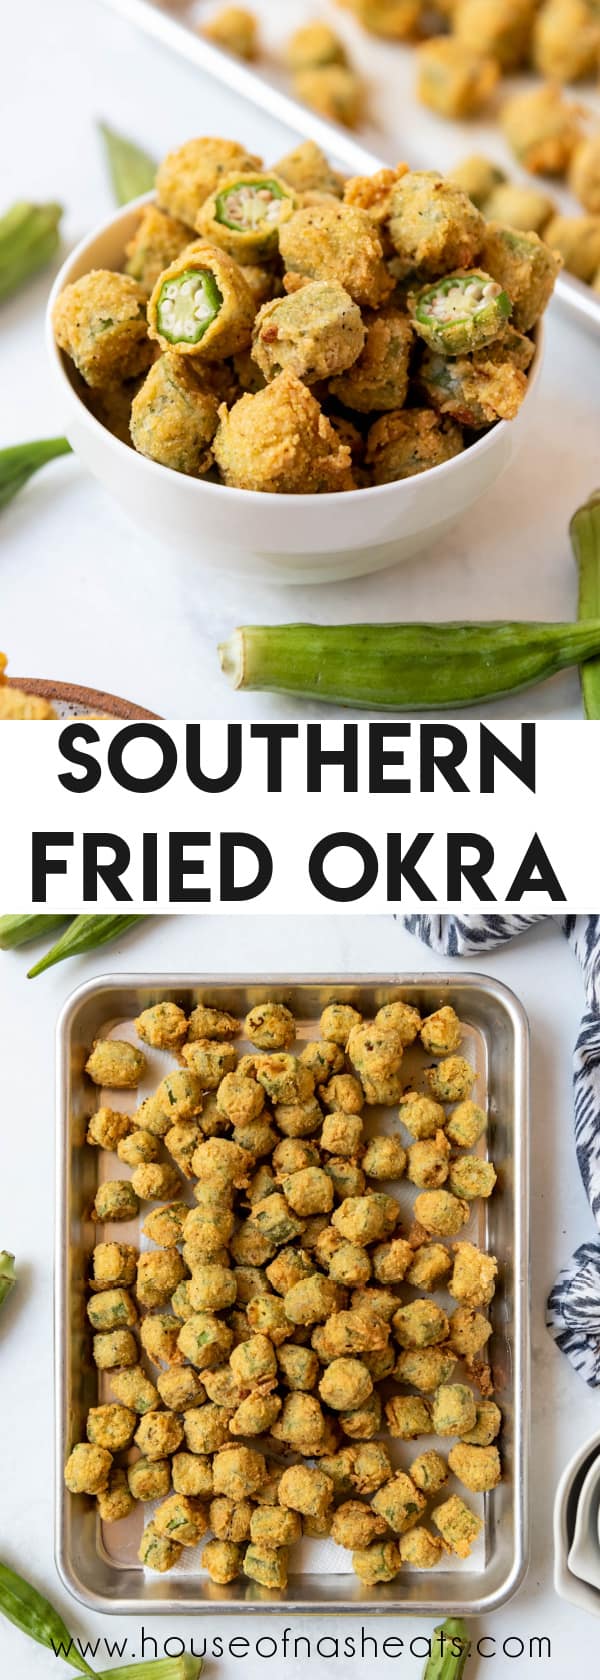 A collage of images of fried okra.